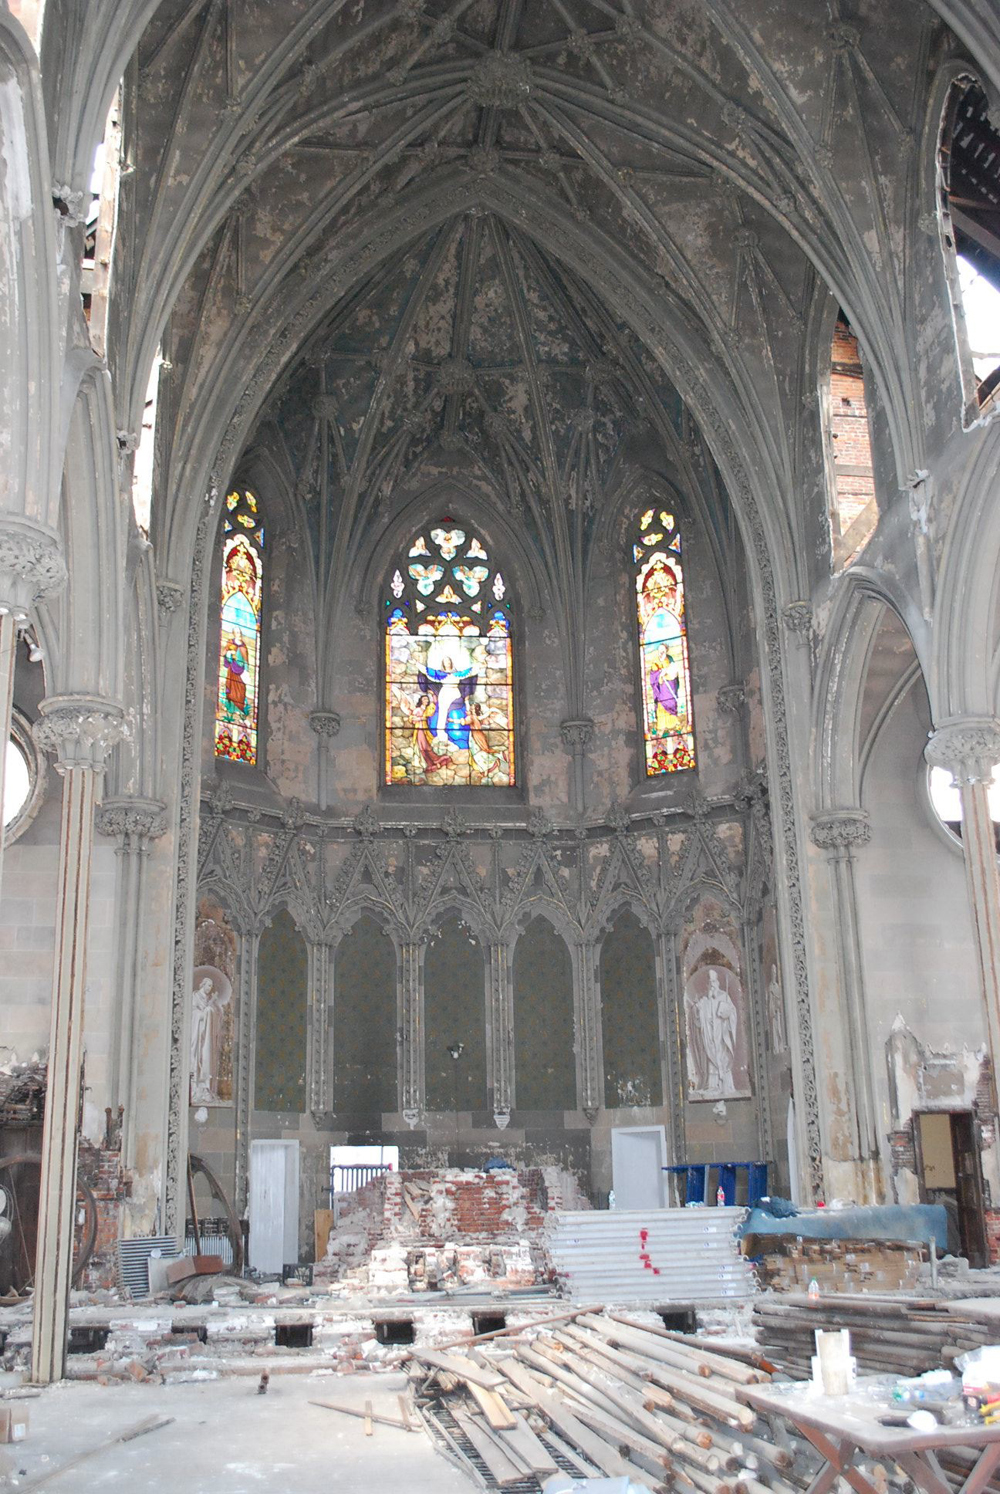 A view of the church after interior demolition began.